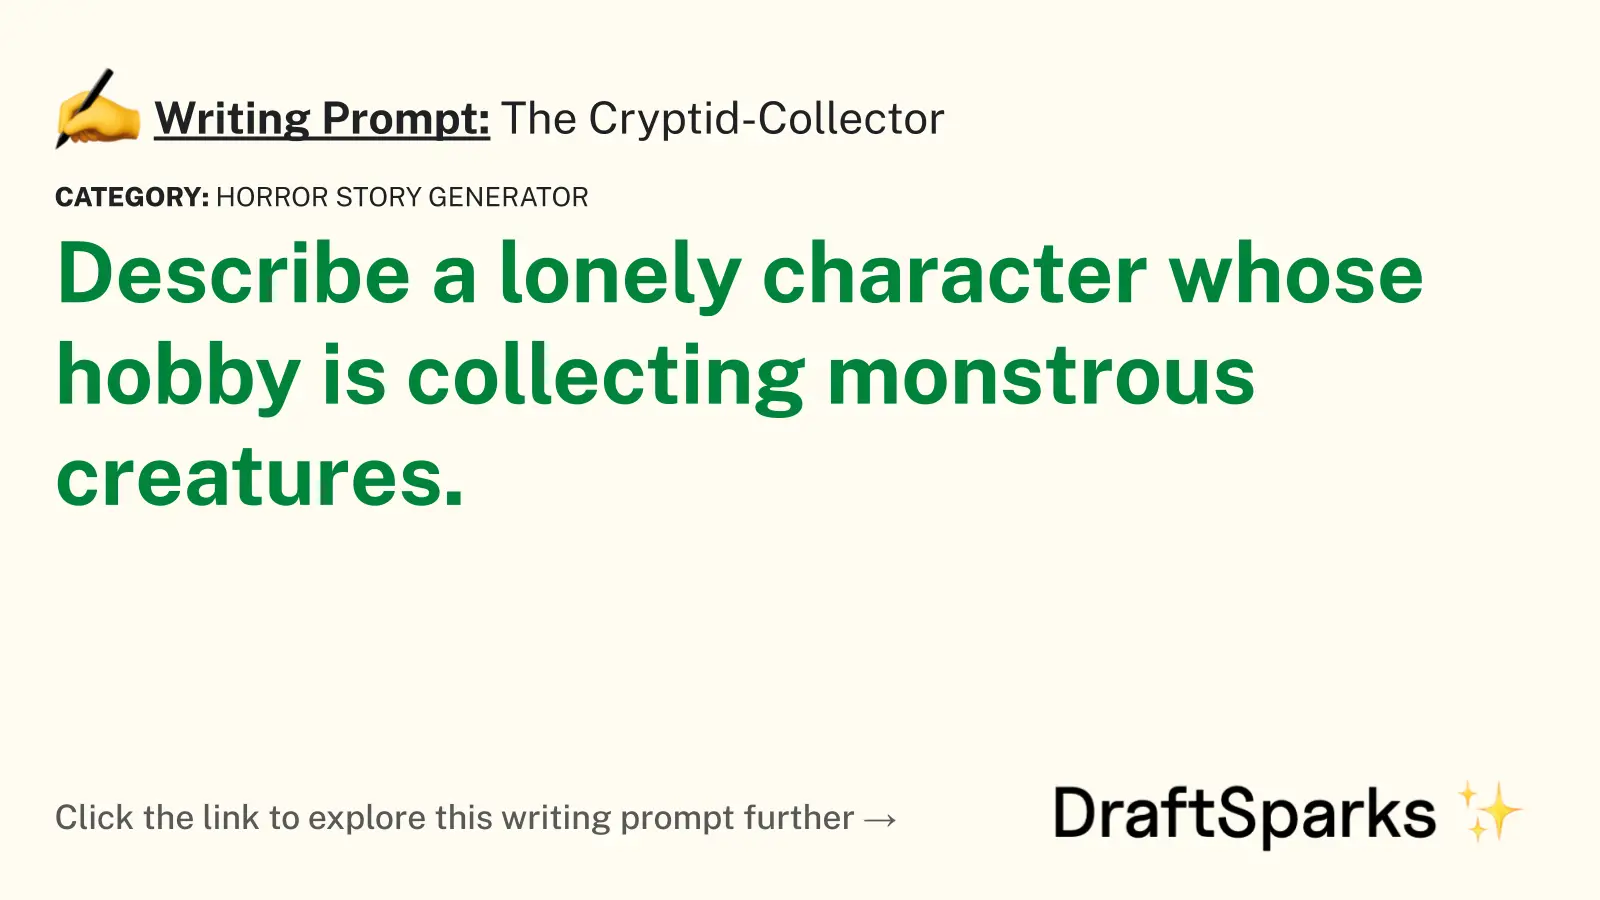 The Cryptid-Collector